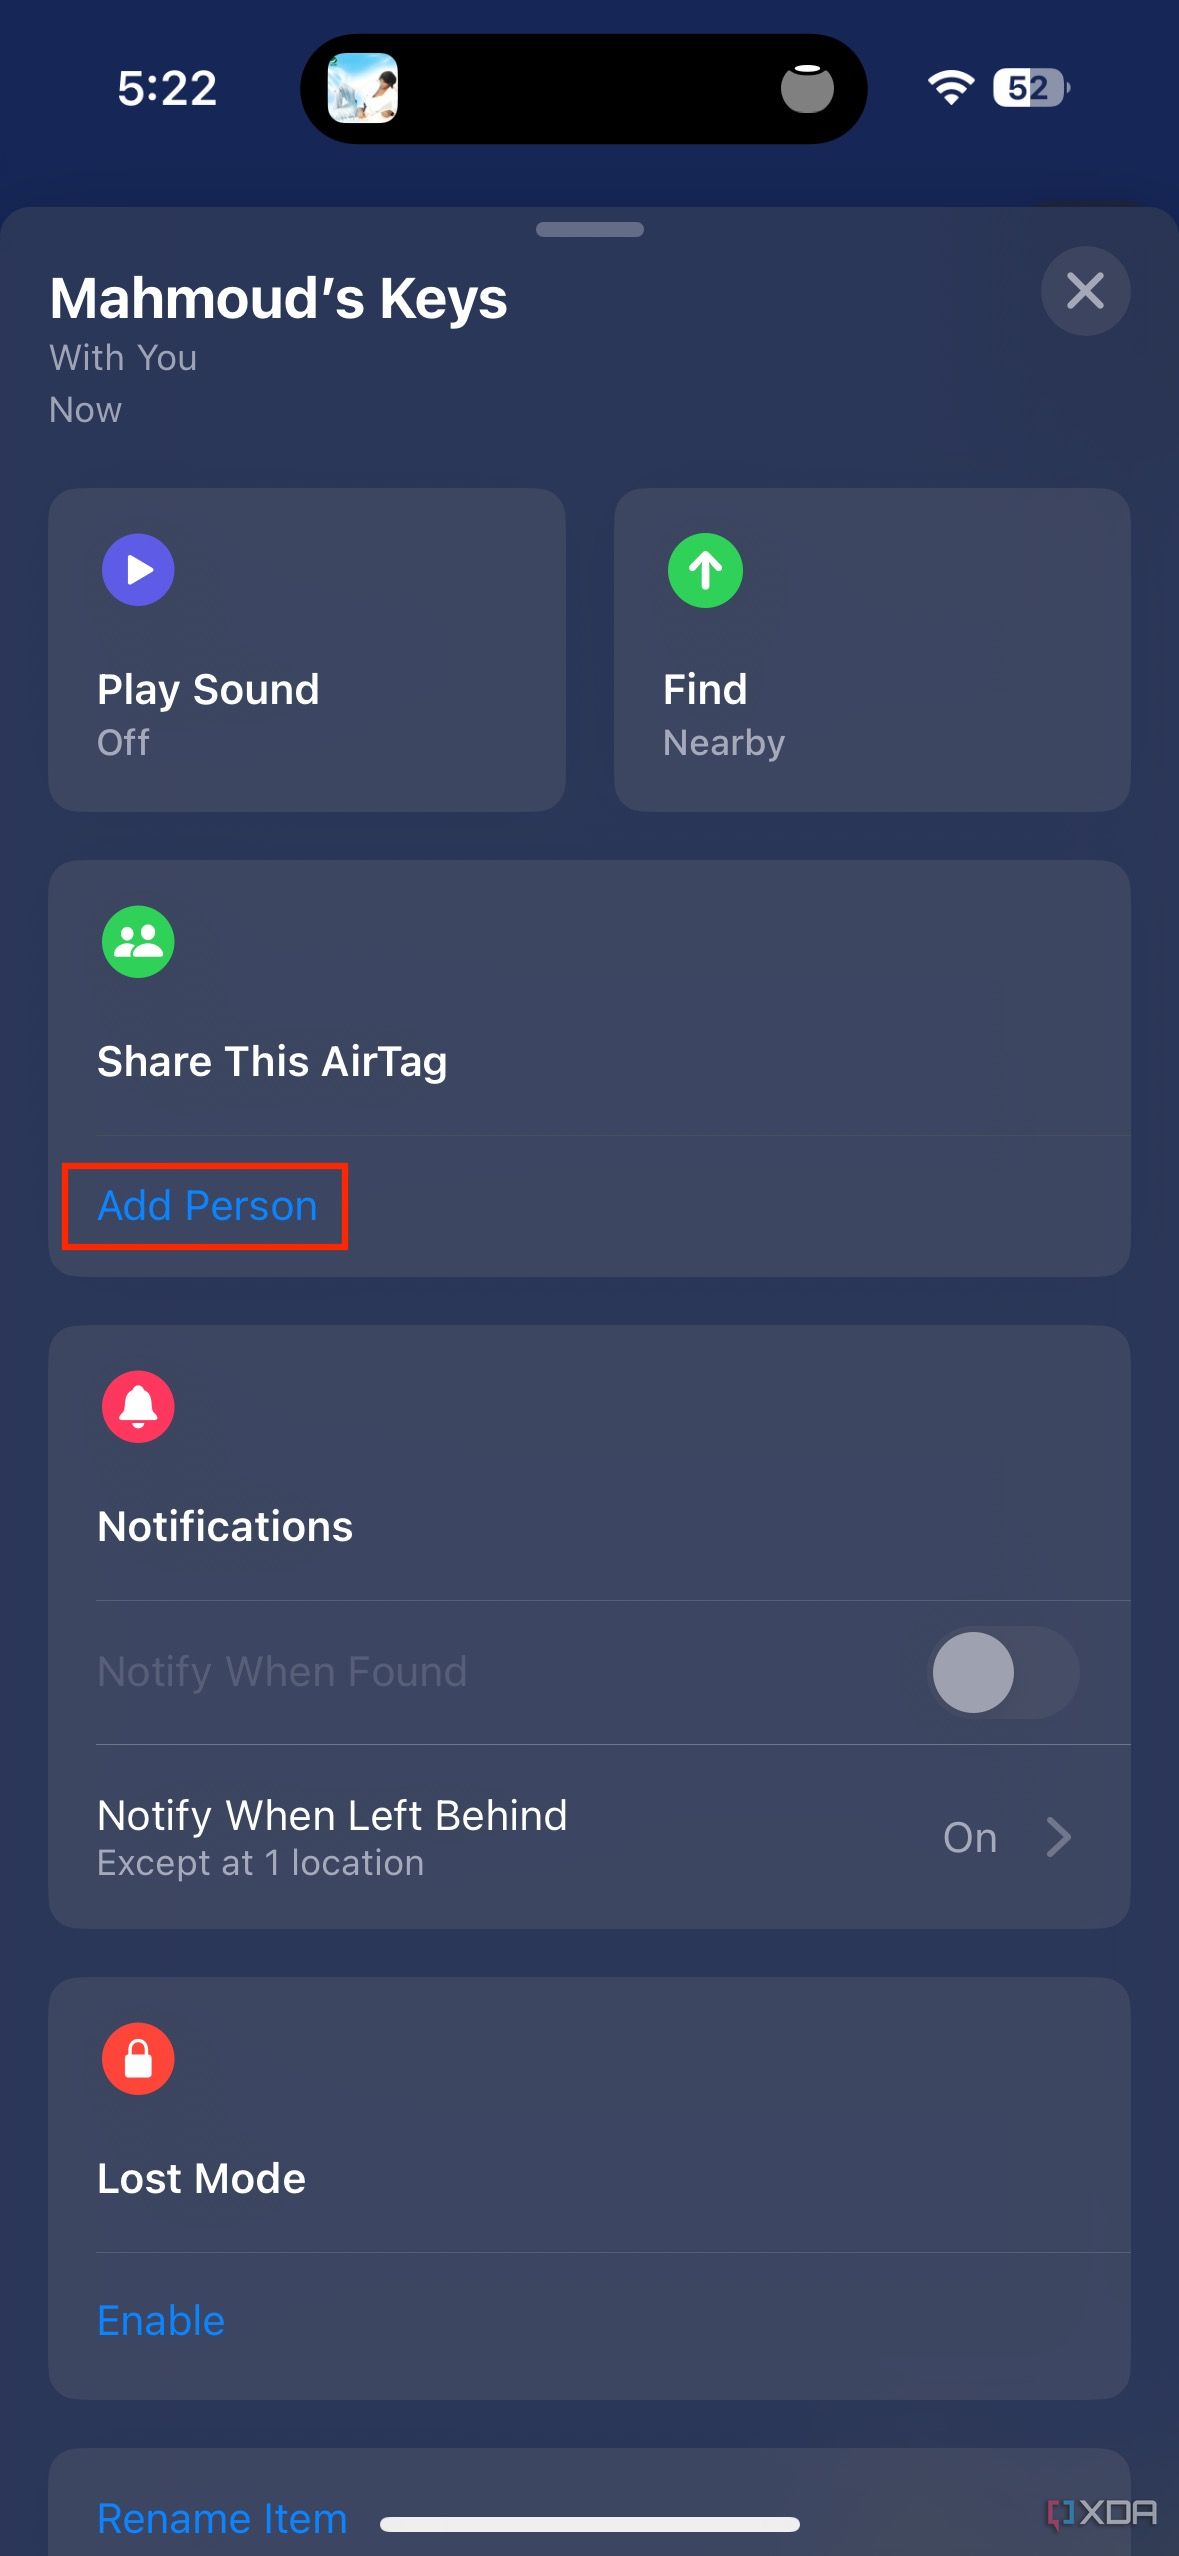 Add person button for sharing AirTag